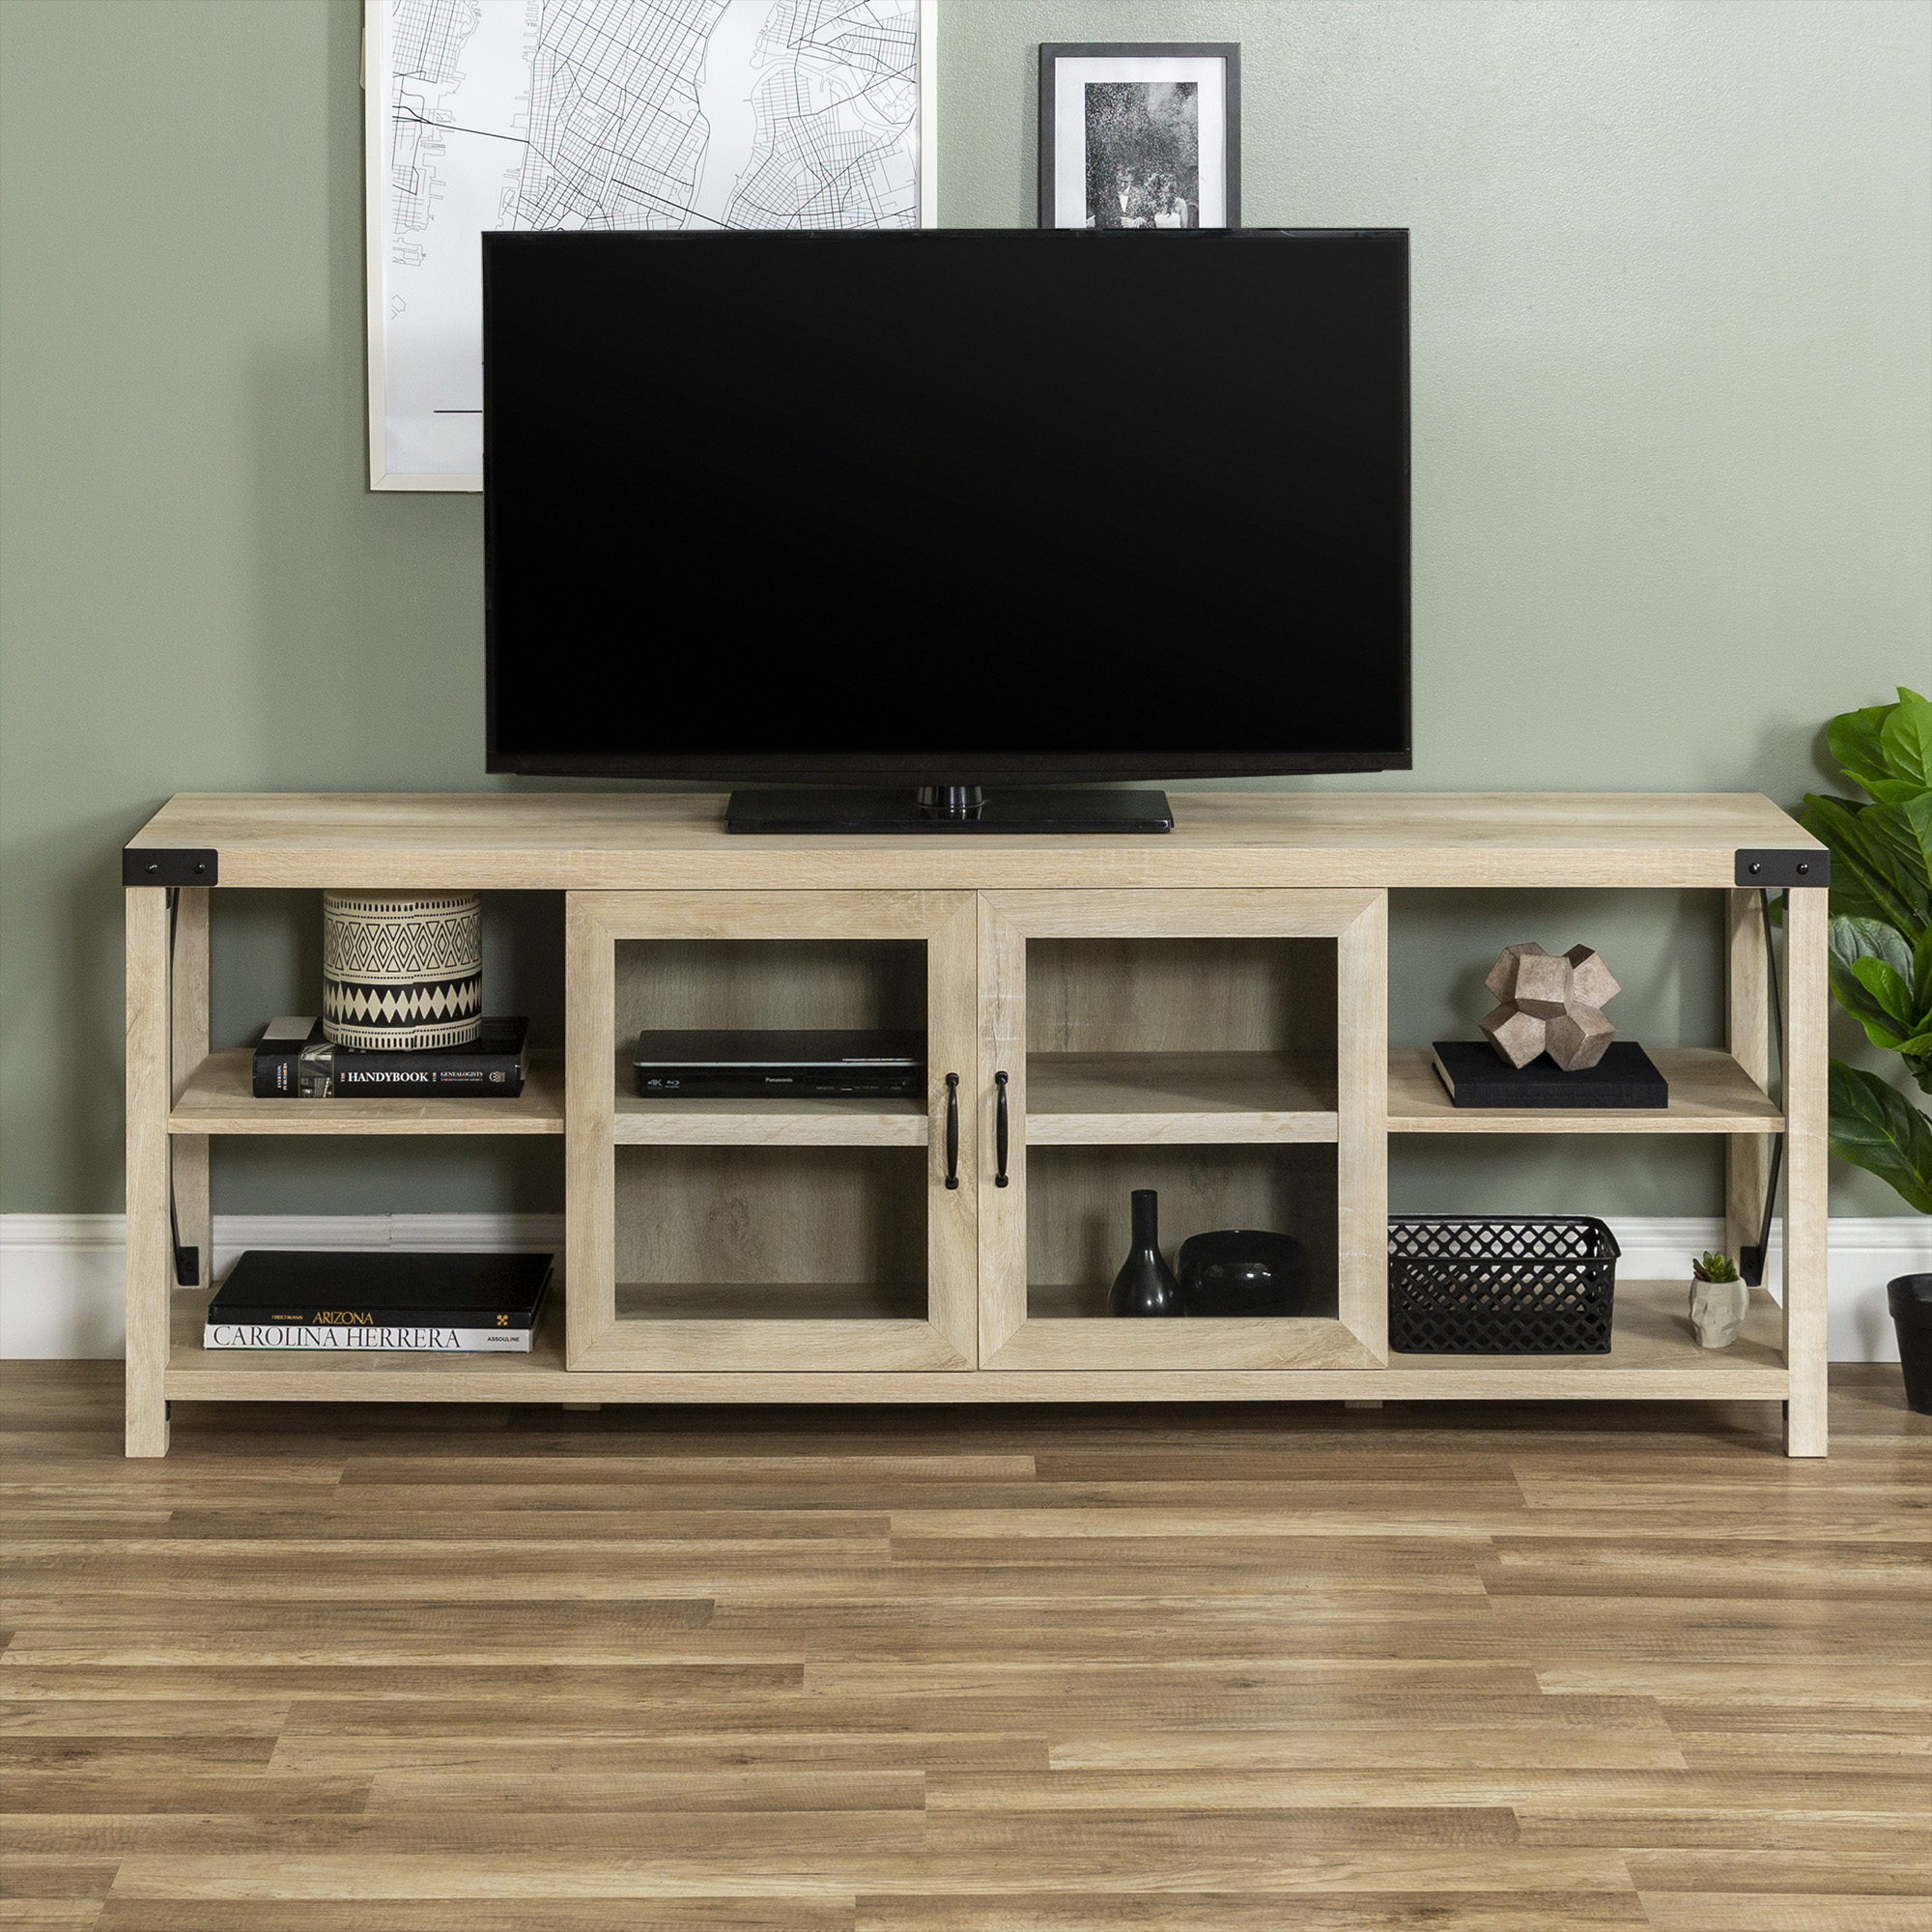 Woven Paths Farmhouse 2-Door Metal X TV Stand for TVs up to 80", White Oak - image 2 of 13